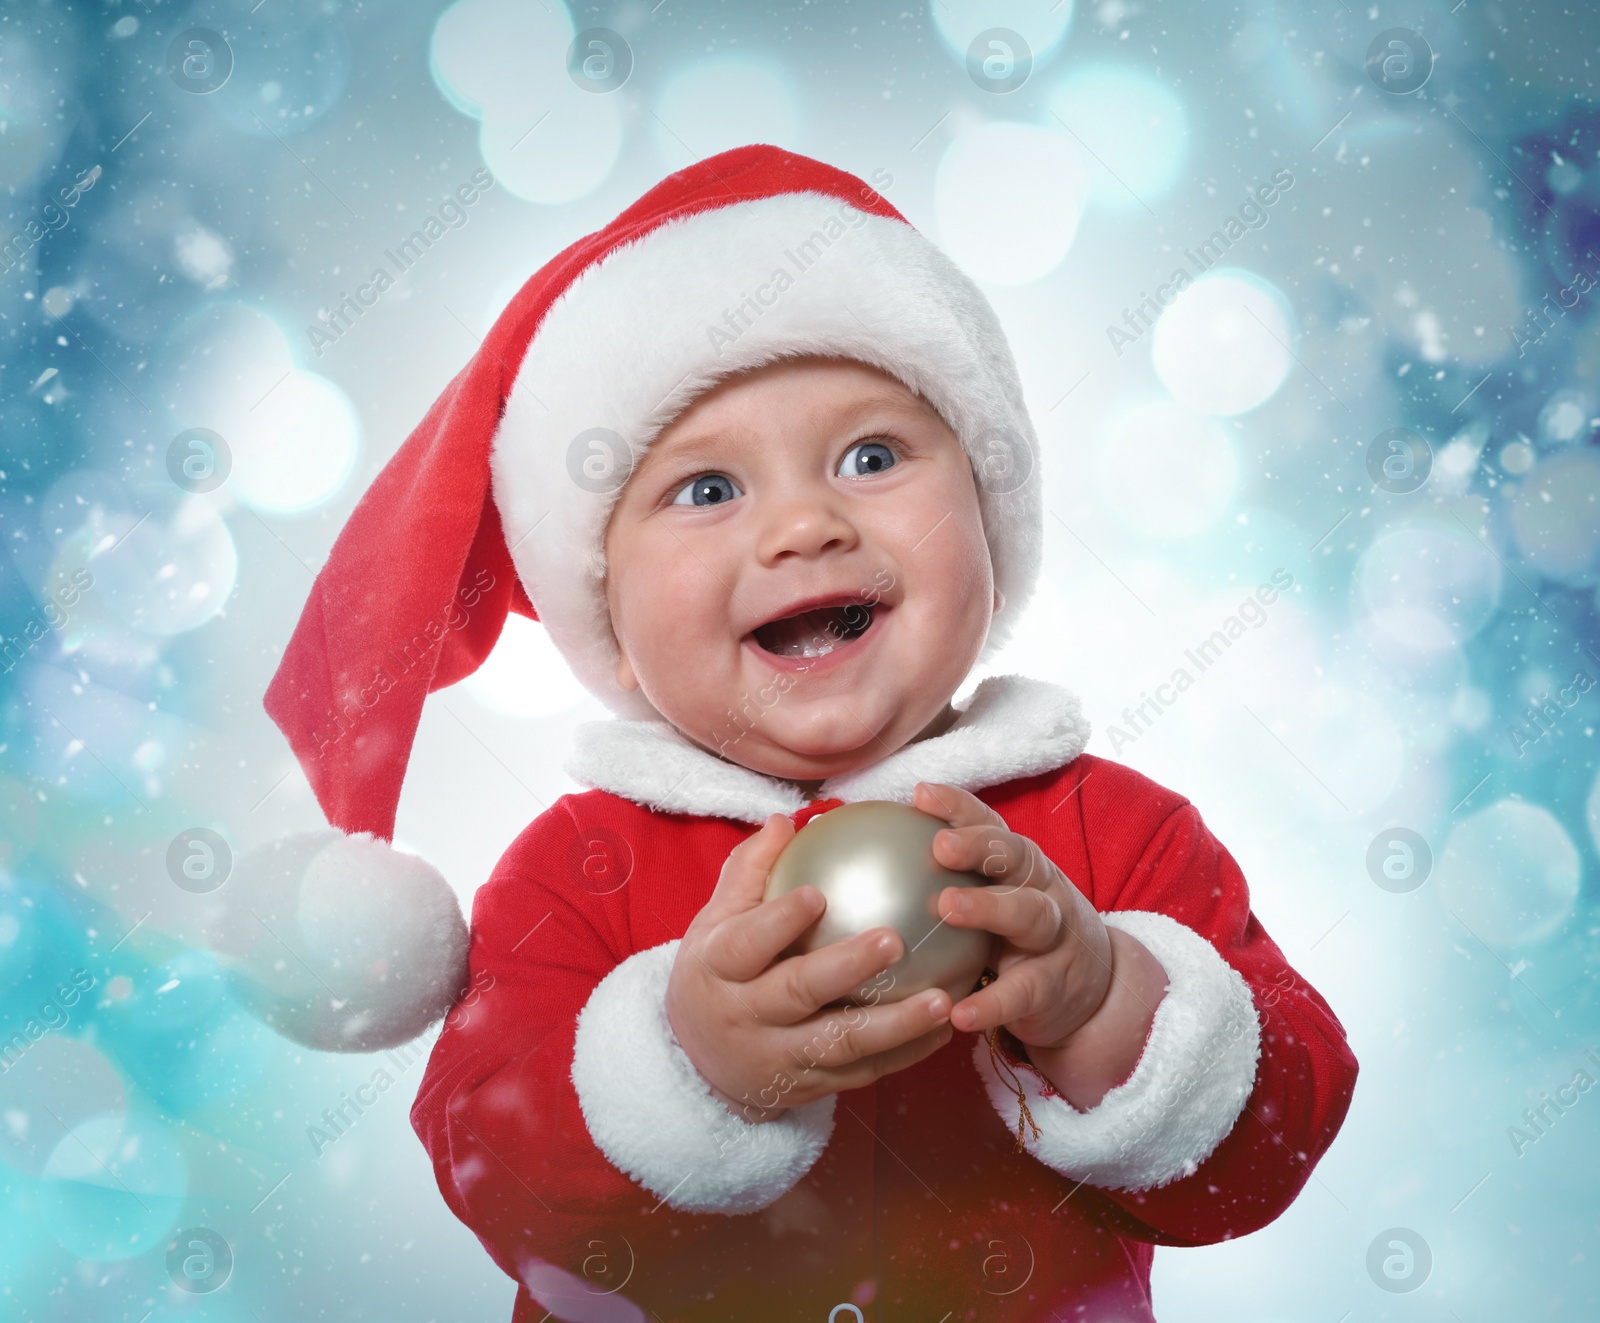 Image of Cute baby in costume with Christmas ball against blurred festive lights 